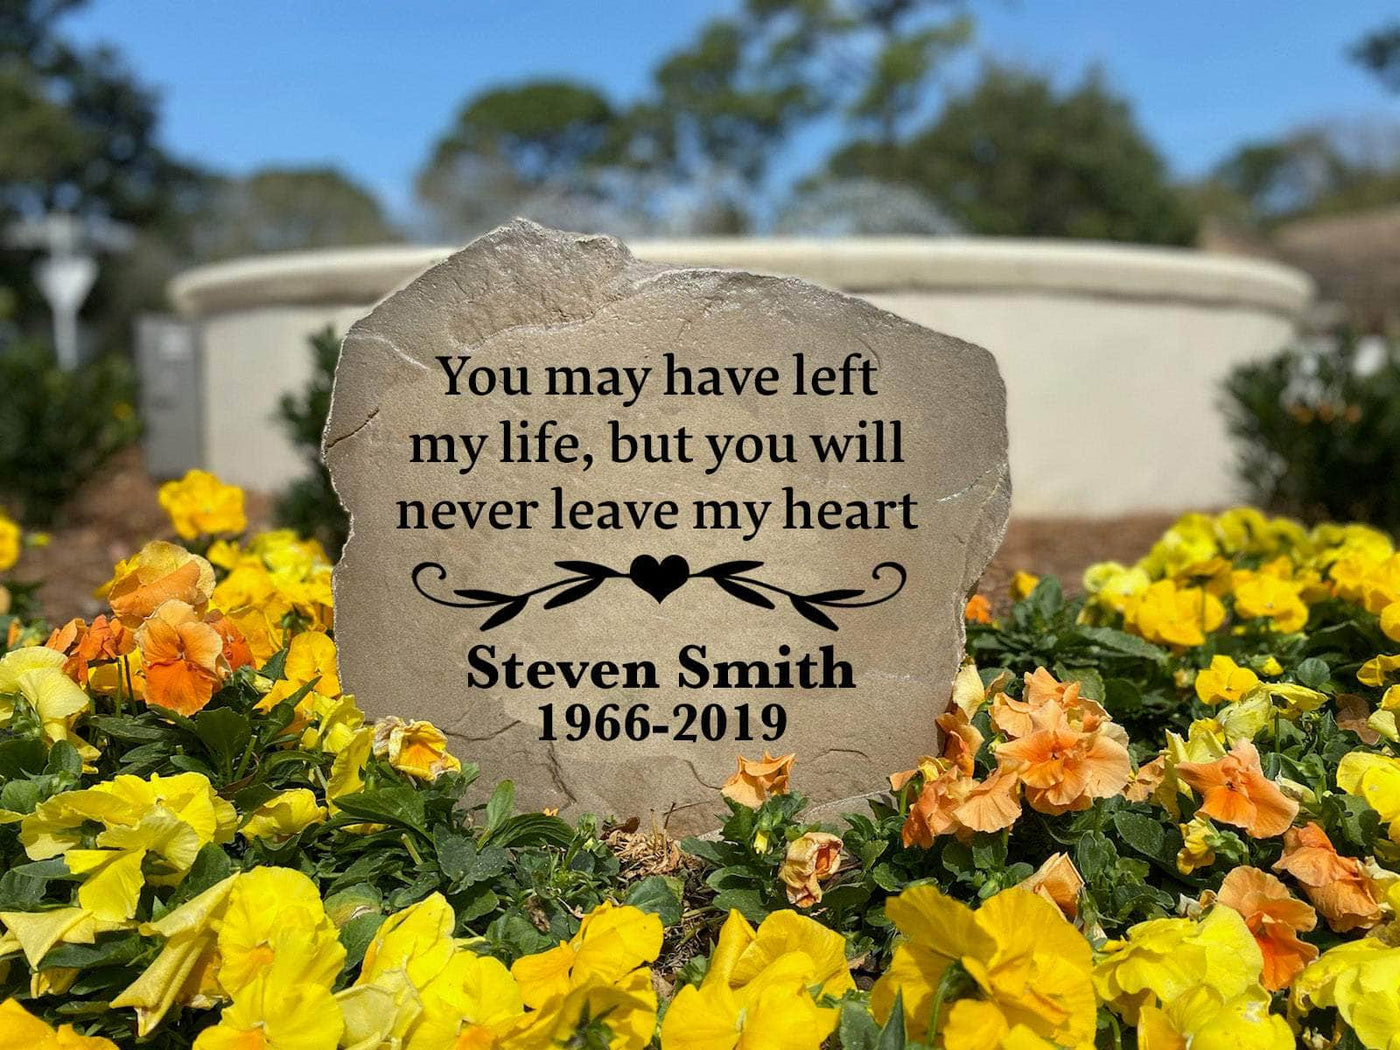 Will Never Leave My Heart Memorial Stone